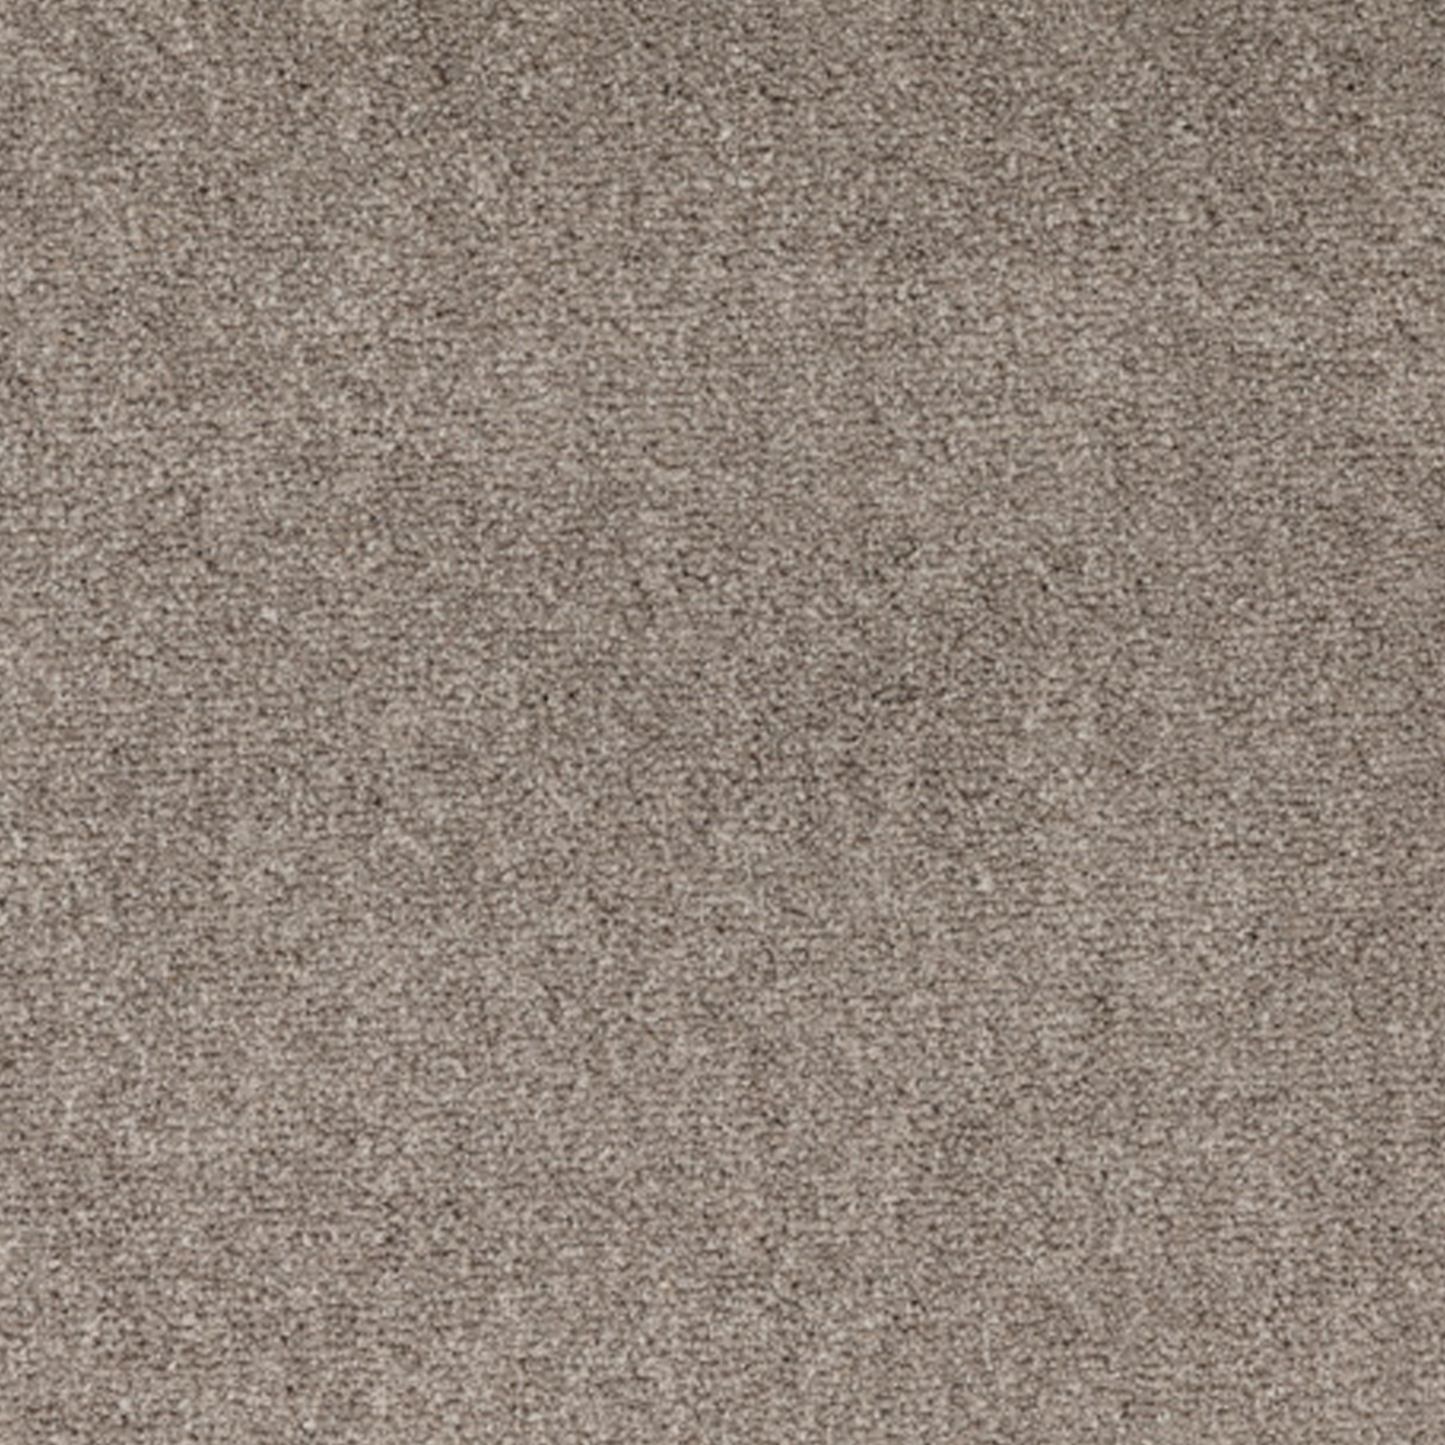 Let's Dance II Polyester Carpet Collection Polyester Carpet by KLD Home